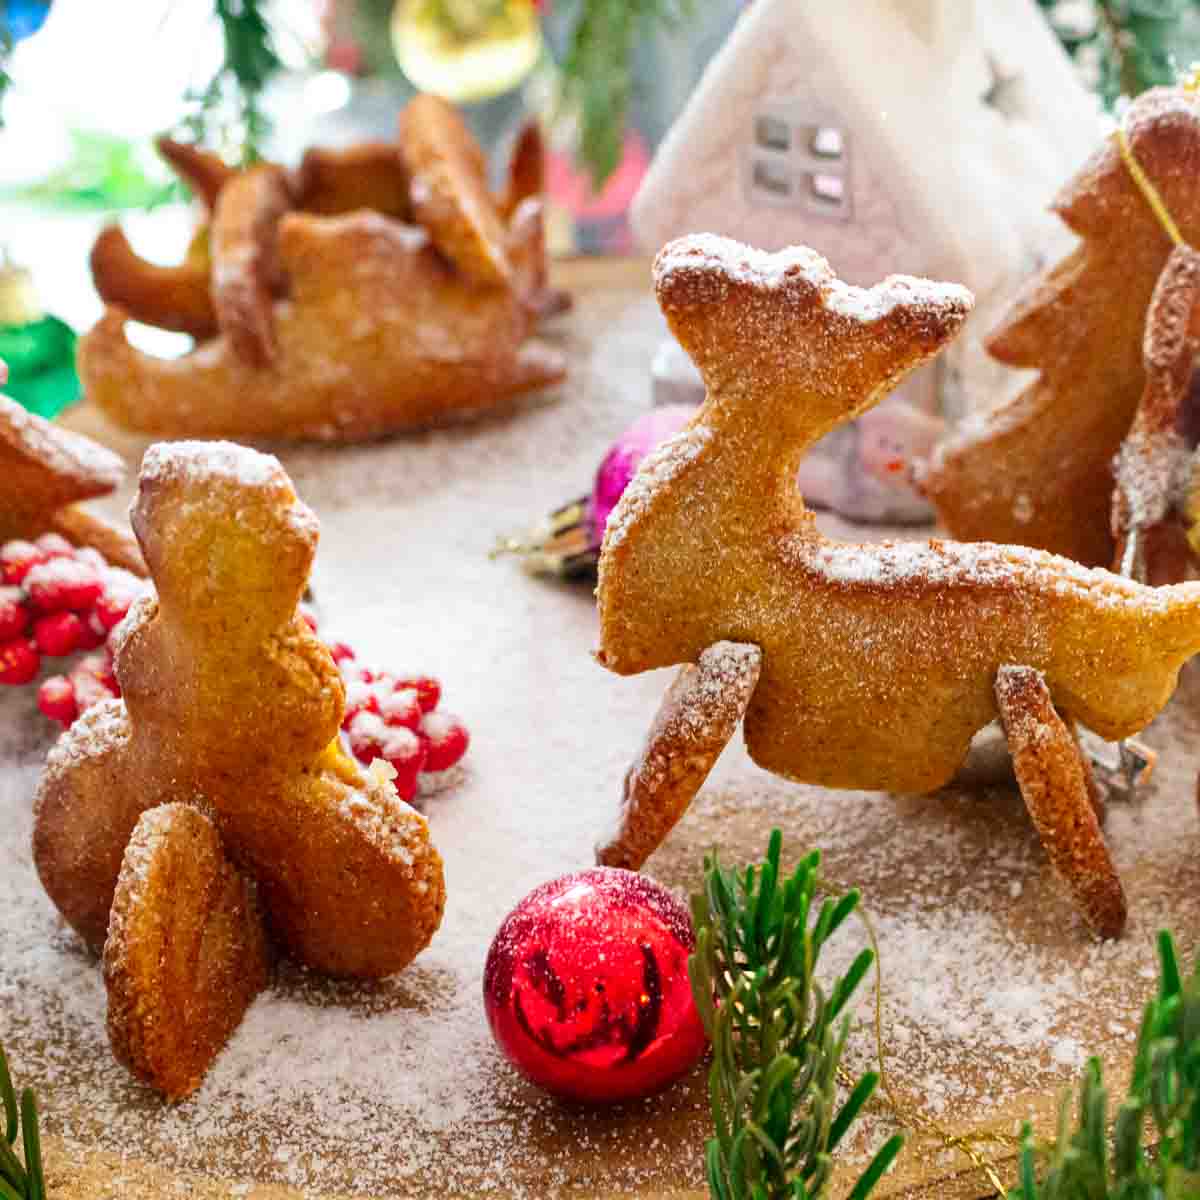 Low carb gingerbread village with decoration.